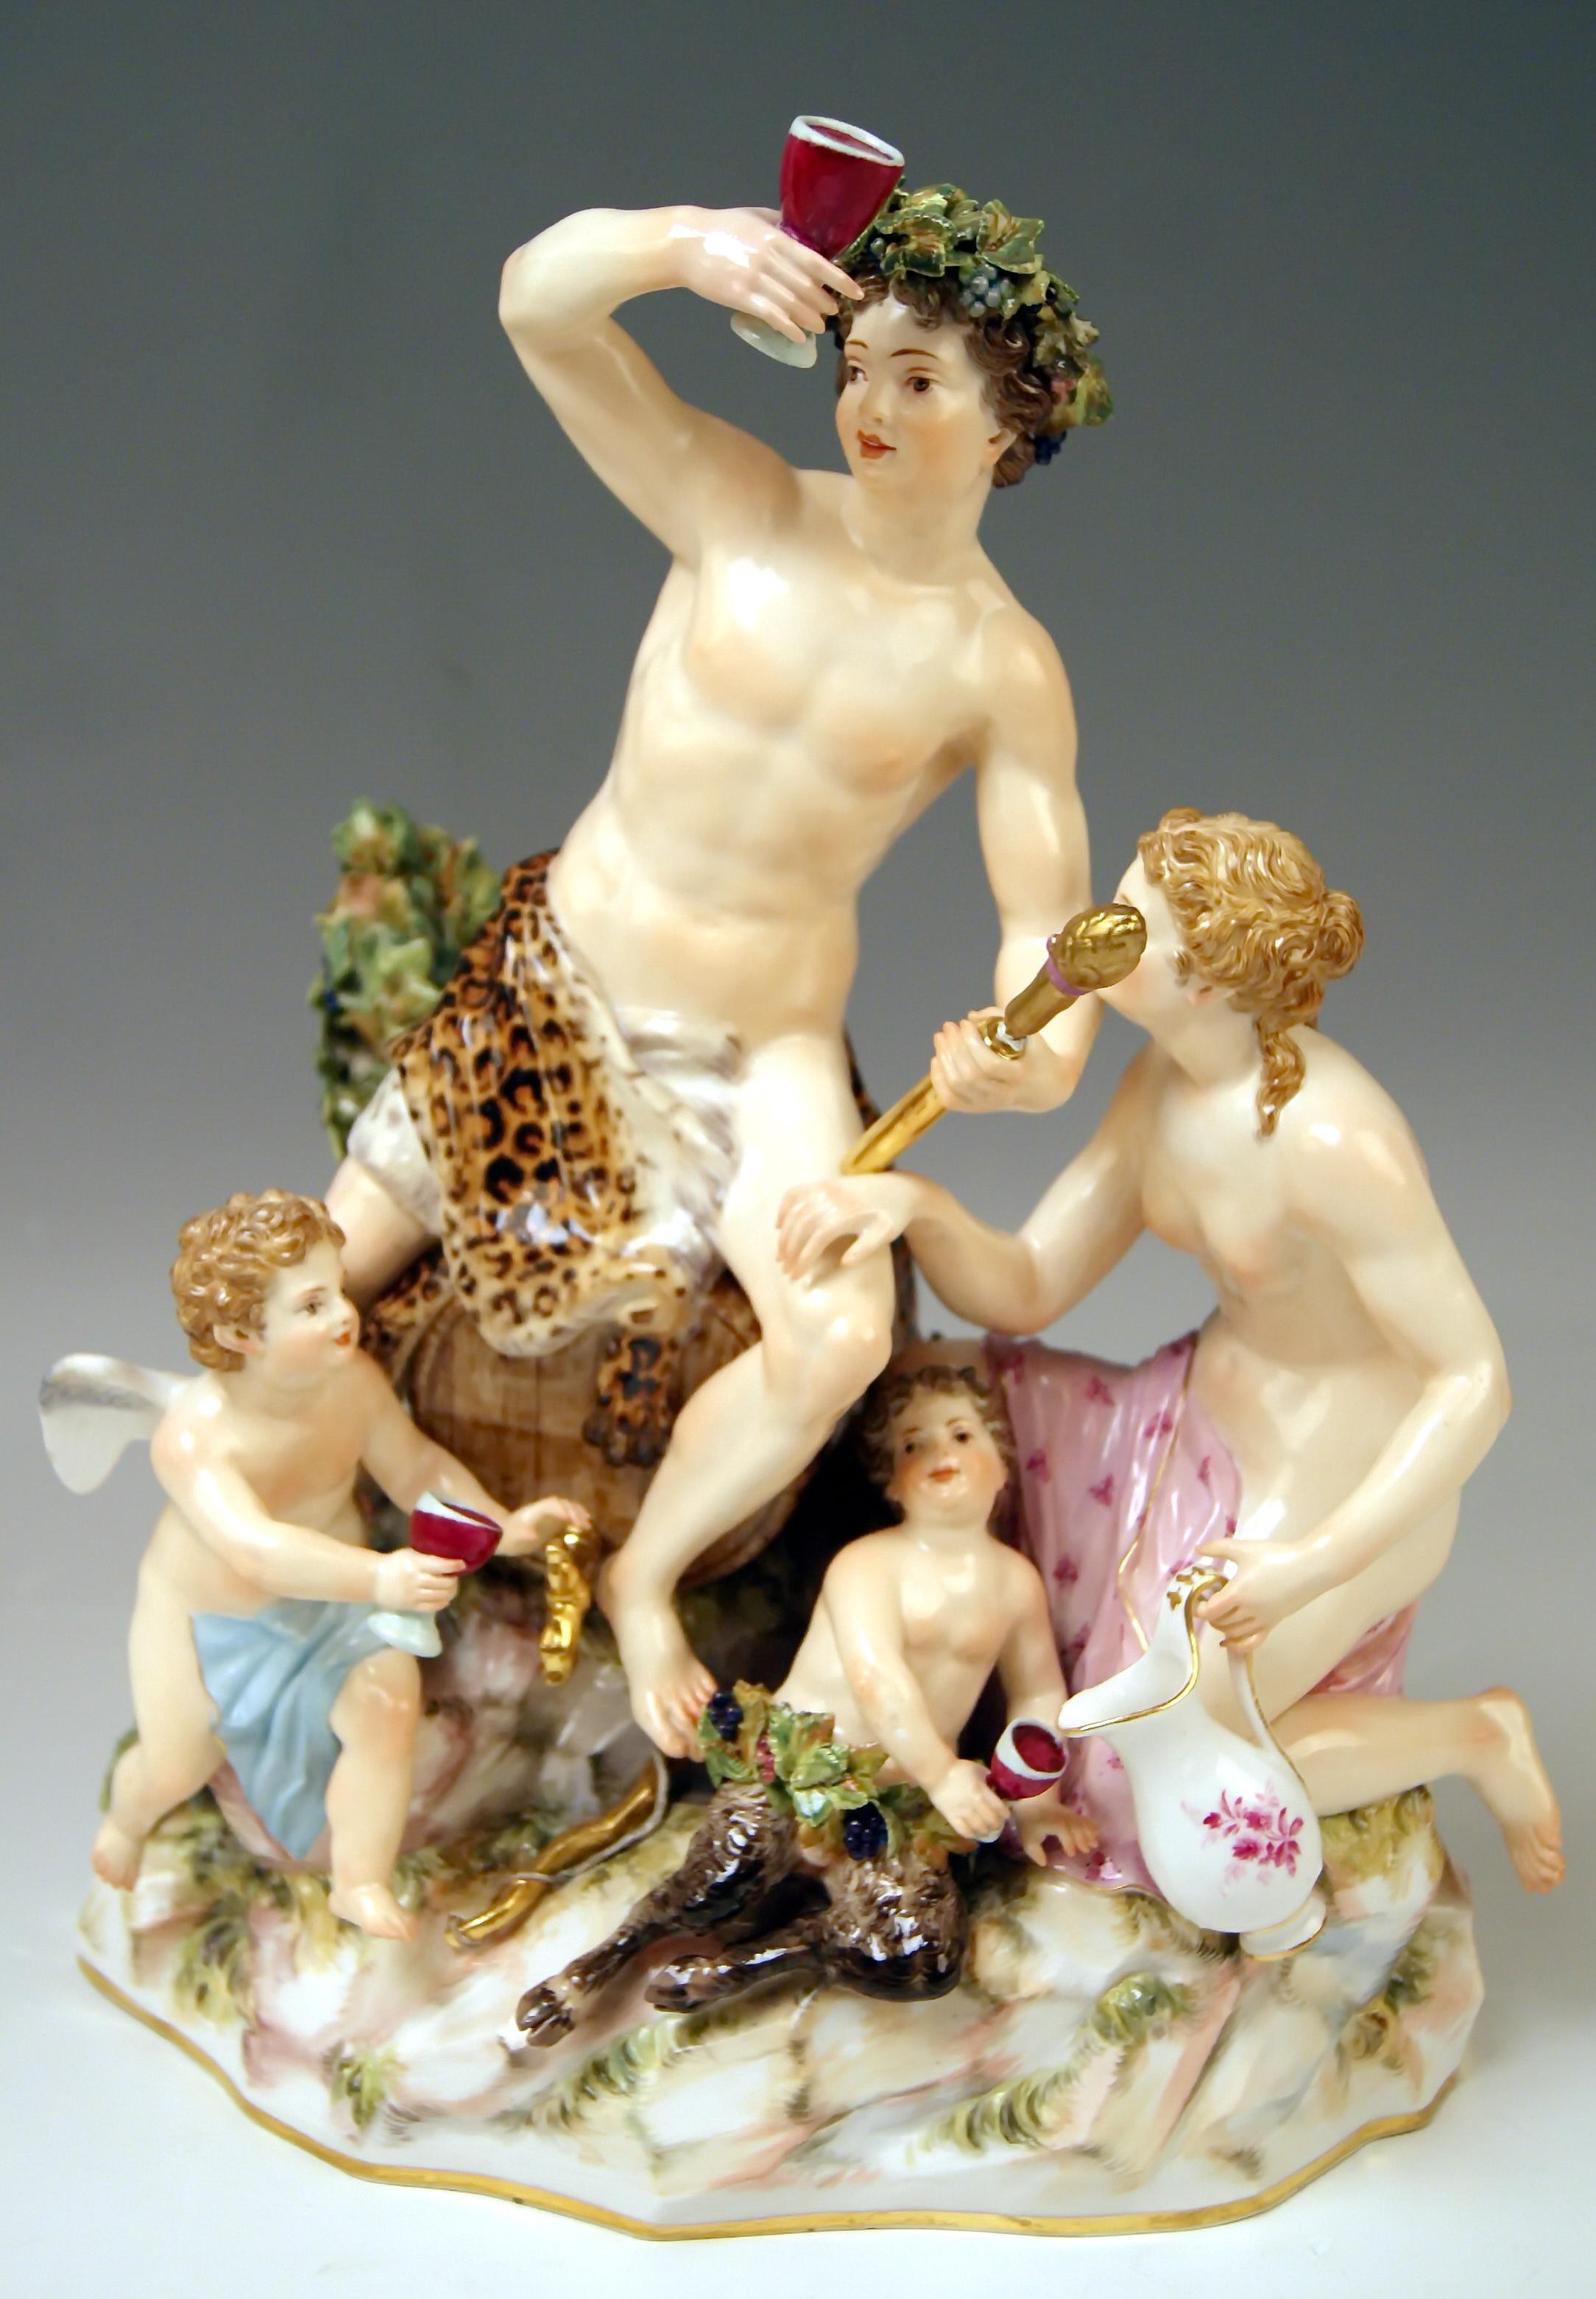 Meissen Gorgeous Figurine Group: 
Bacchanal / God Of Wine Bacchus With Nymph, Winged Cherub And Boyish Satyr

MARKS:
MEISSEN CROSSED SWORD MARK WITH POMMELS ON HILTS OF SECOND HALF OF 19TH CENTURY
FIRST QUALITY
model number C 35 X
former's